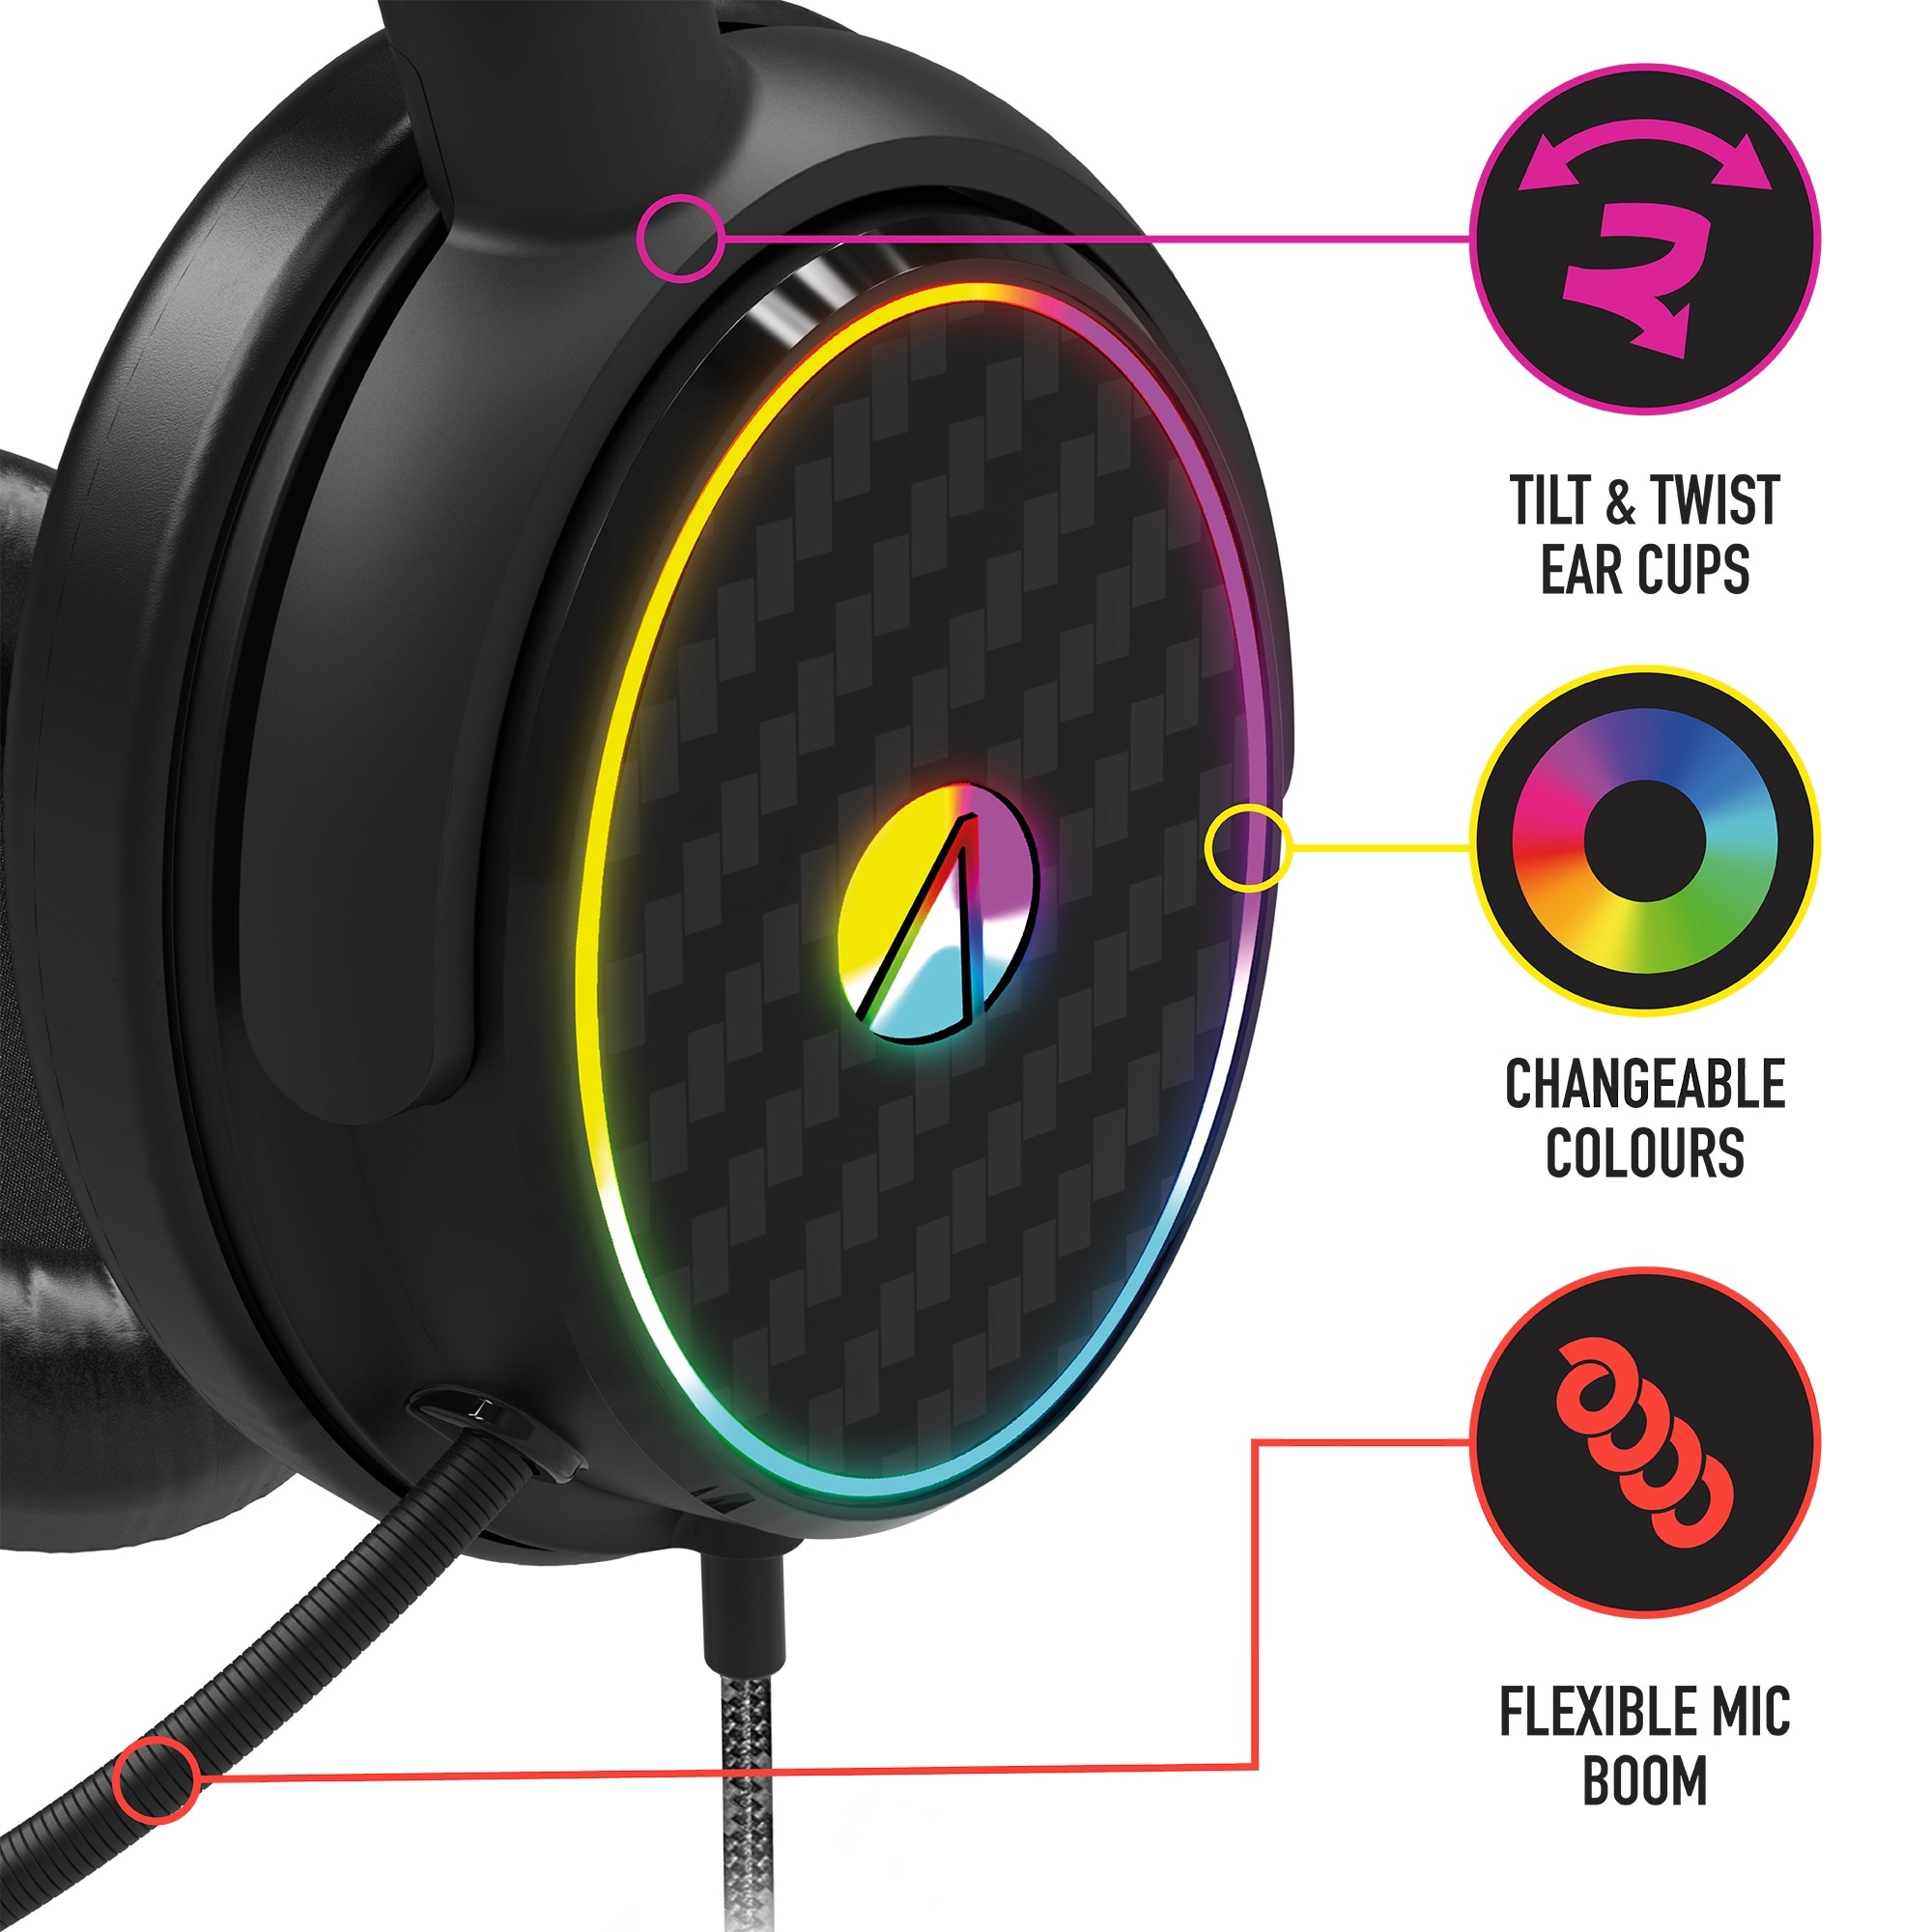 Gaming UNIVERSAL Stealth | kaufen »Stereo C6-100 Headset Verpackung Plastikfreie mit Gaming-Headset LED Beleuchtung«, online